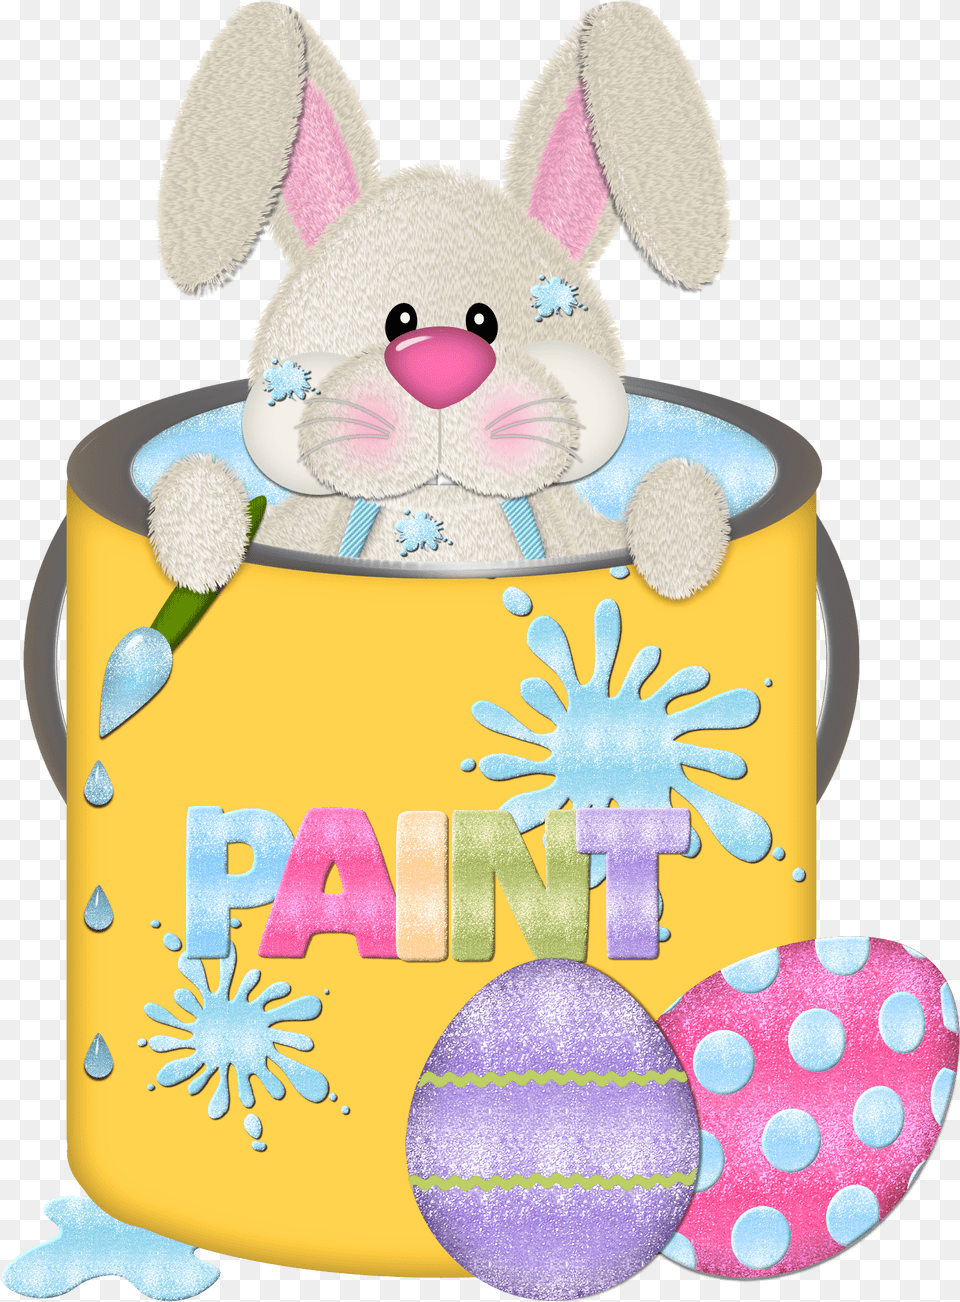 Easter Bunny In Cup Transparent Clipart Easter, Birthday Cake, Cake, Cream, Dessert Png